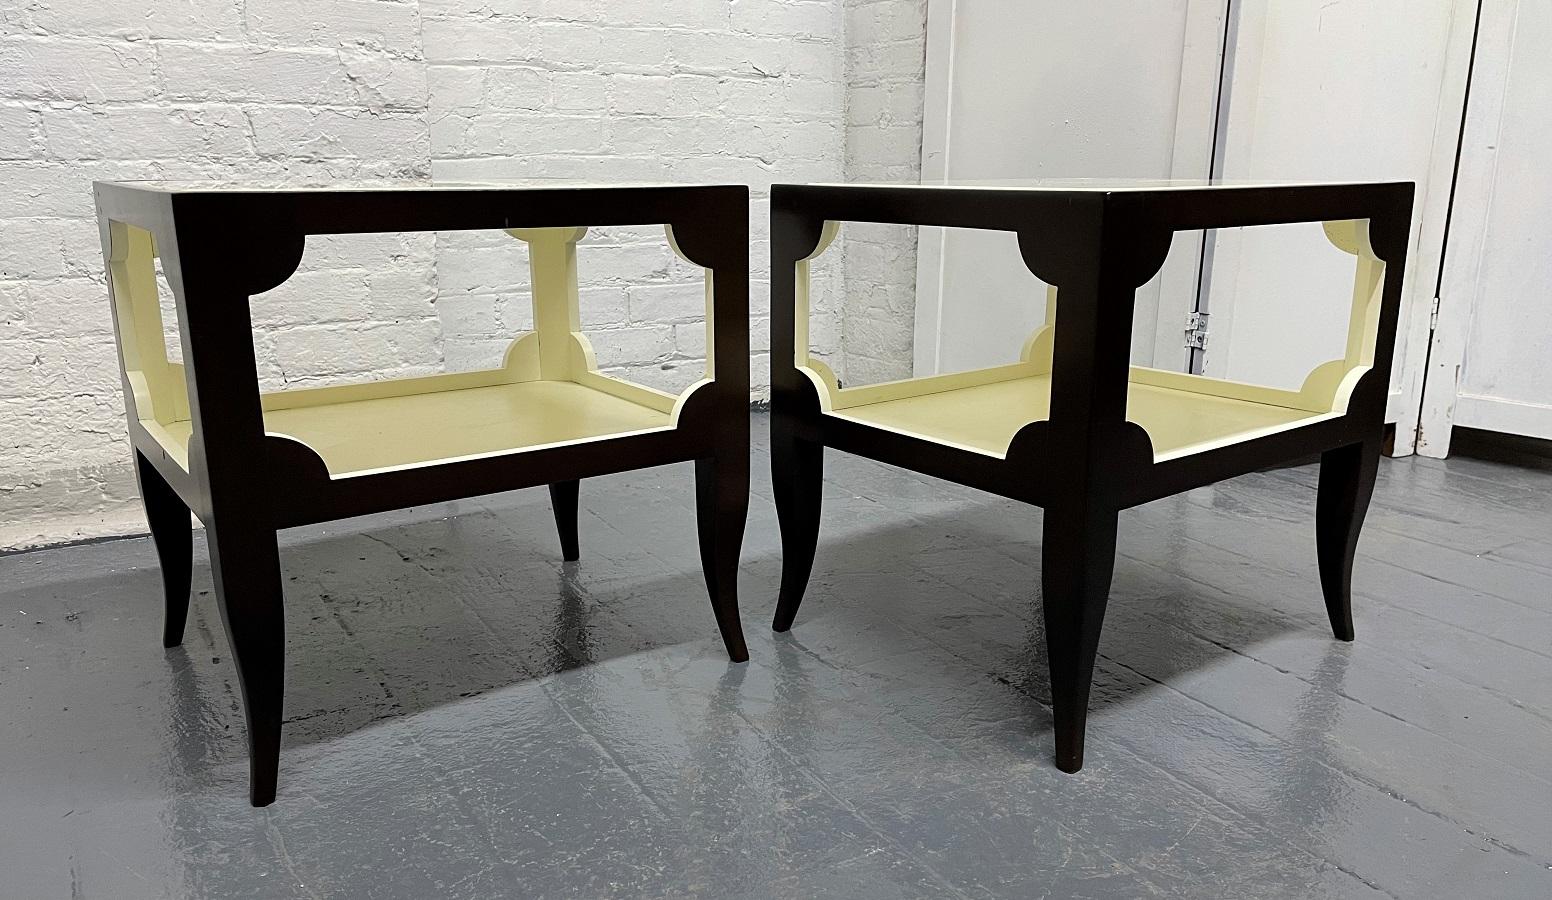 Pair of Tommi Parzinger Originals tables with Onyx Tops. The frames are mahogany and the top tier has solid onyx inserts.